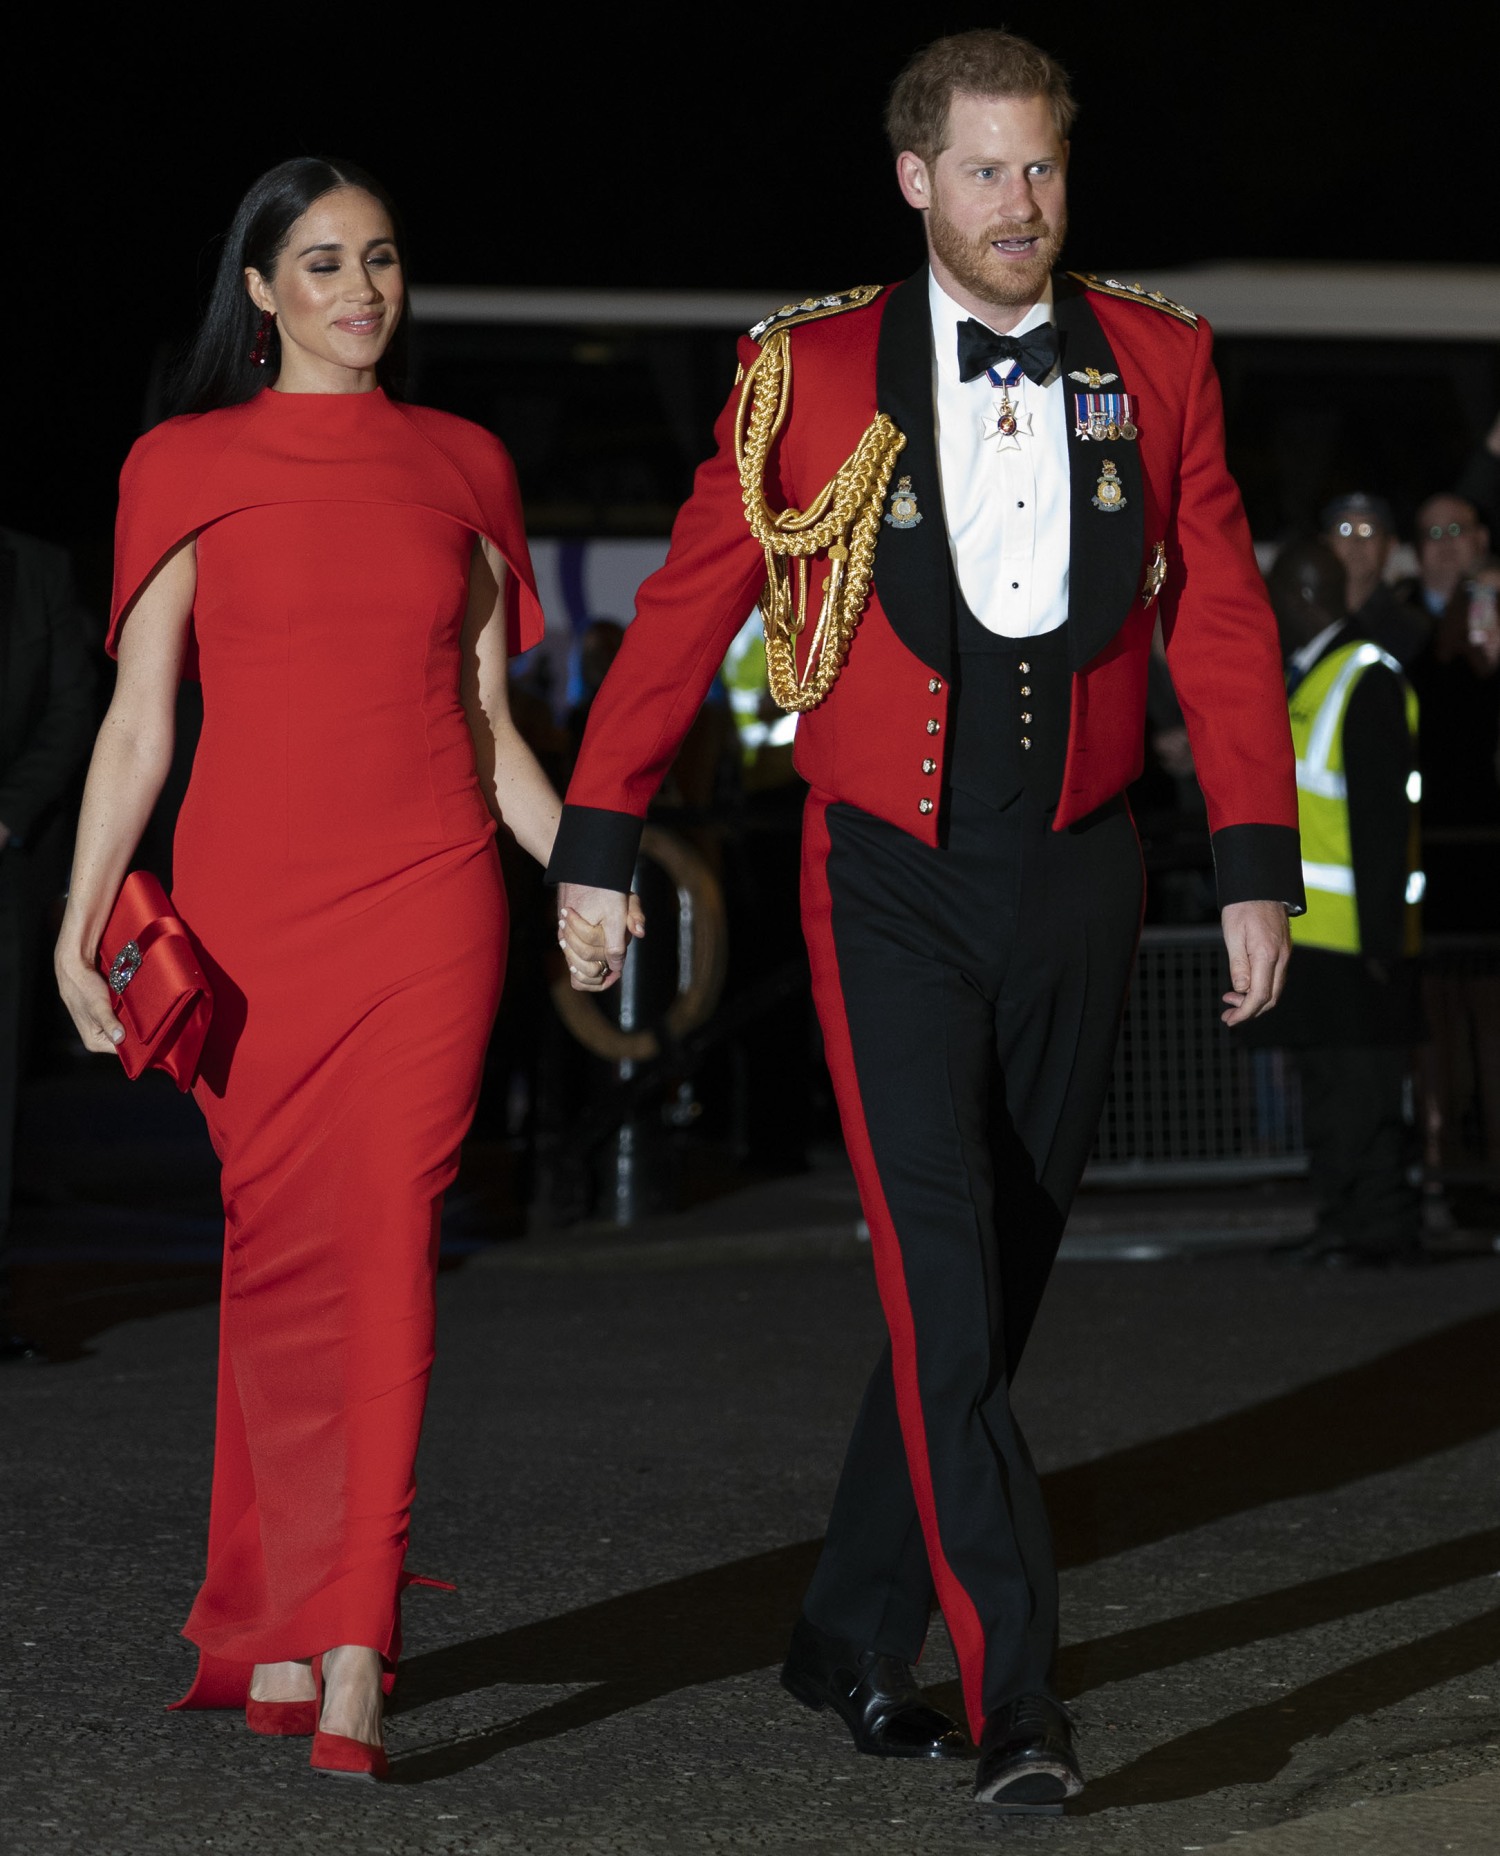 The Duke and Duchess of Sussex arrive at the Albert Hall for the  Mountbatten Festival of Music this evening 7 - March - 2020